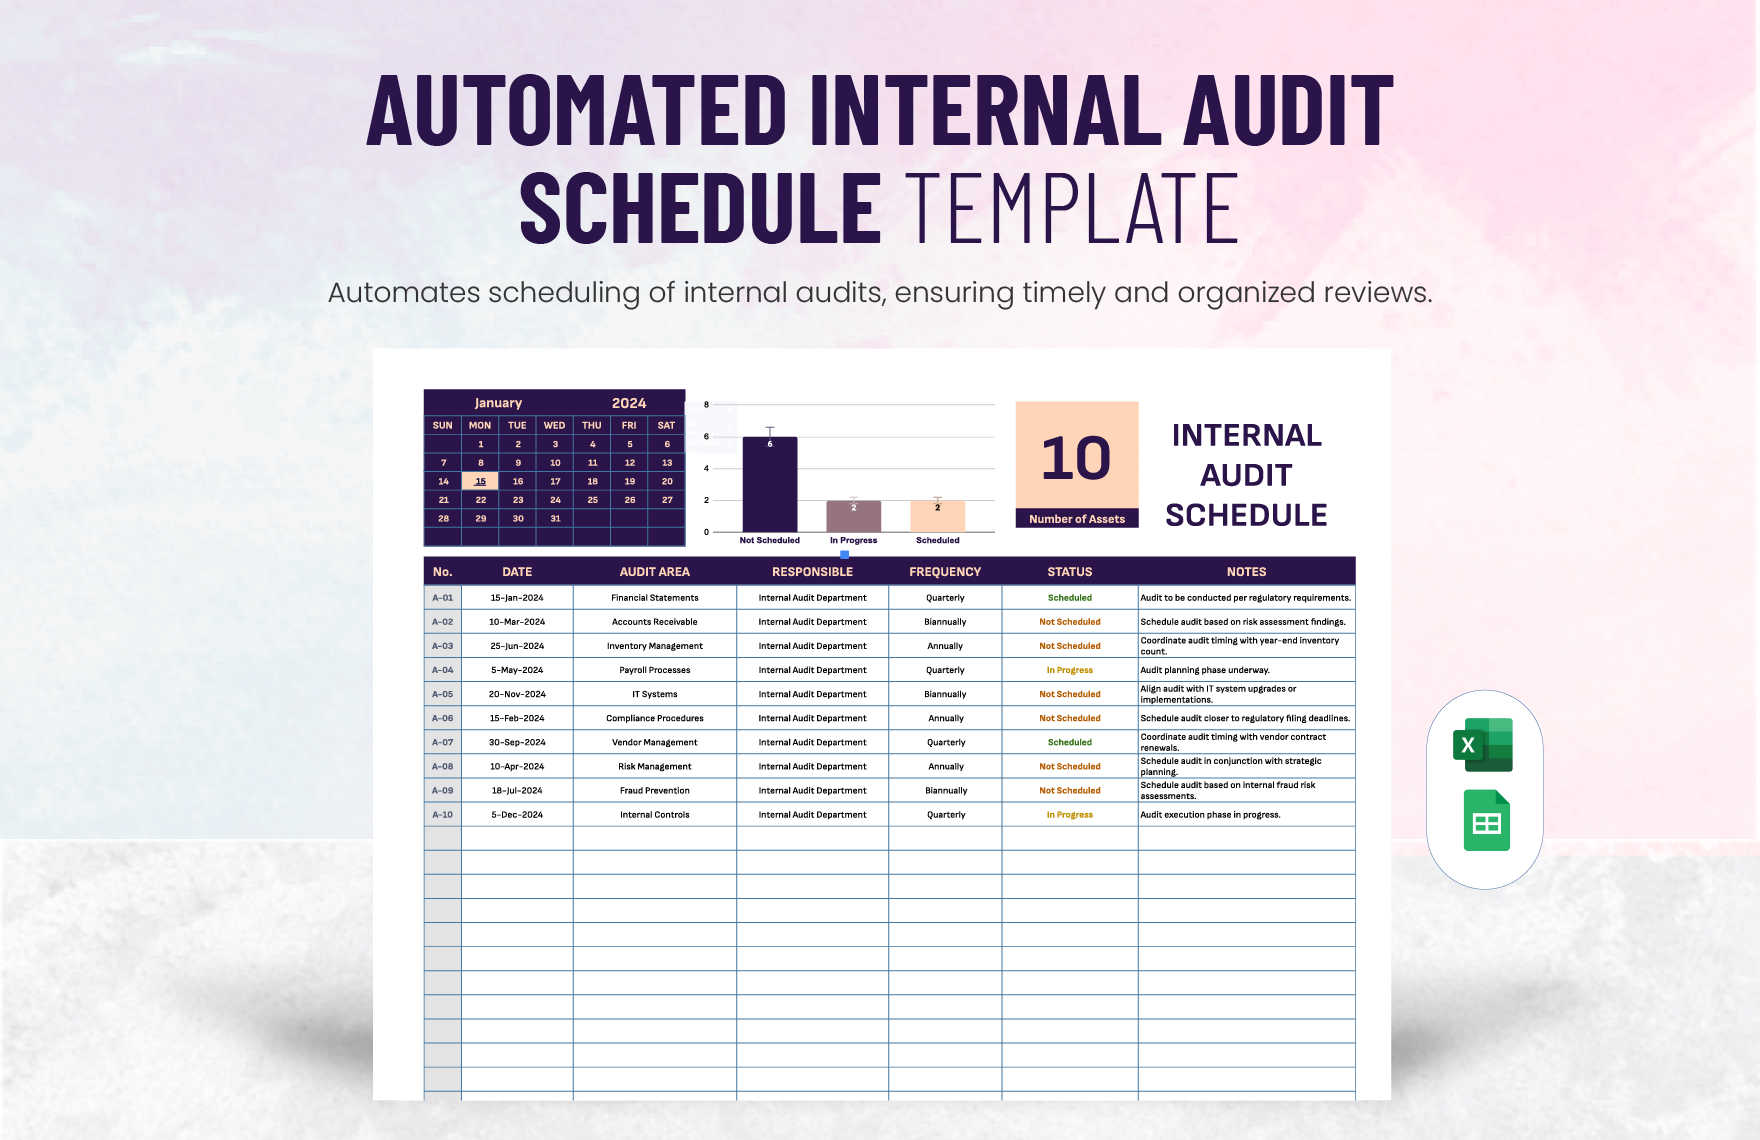 Automated Internal Audit Schedule Template in Excel, Google Sheets